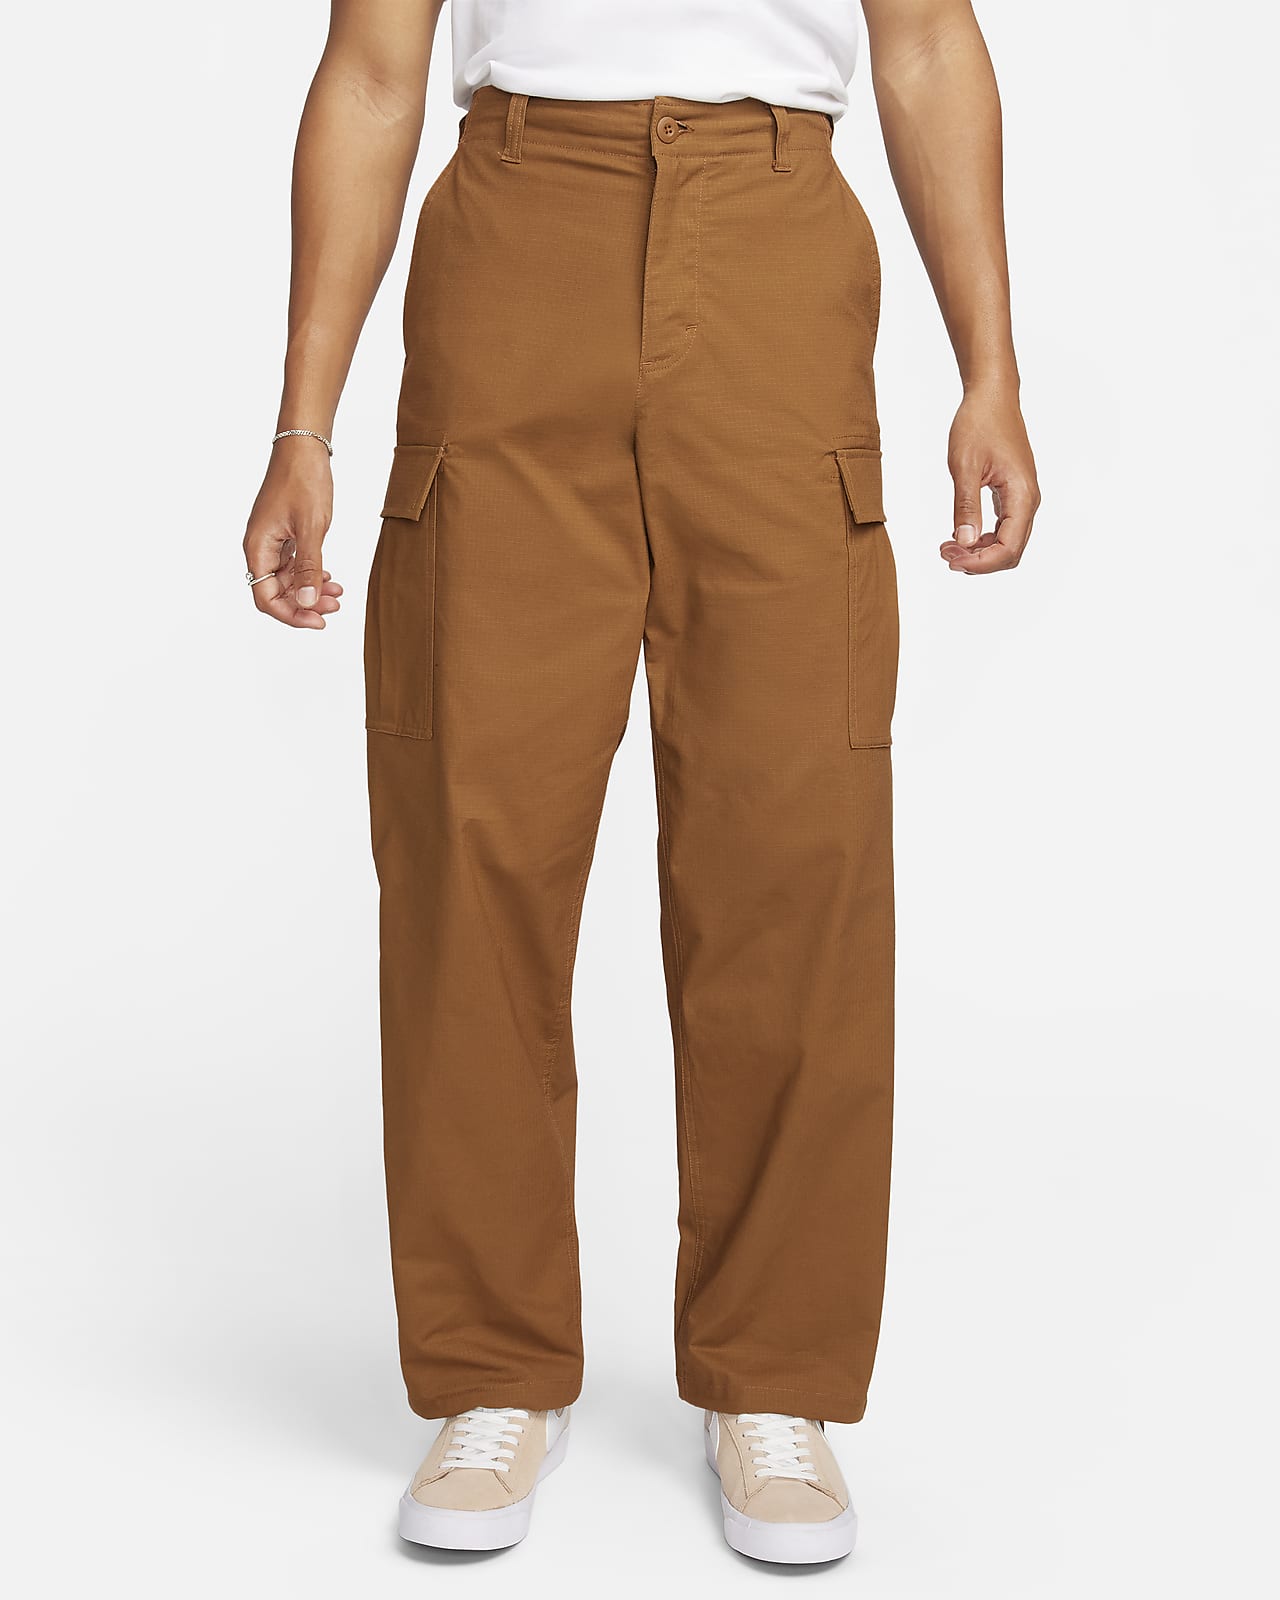 Zara Pants for Men on sale - Best Prices in Philippines - Philippines price